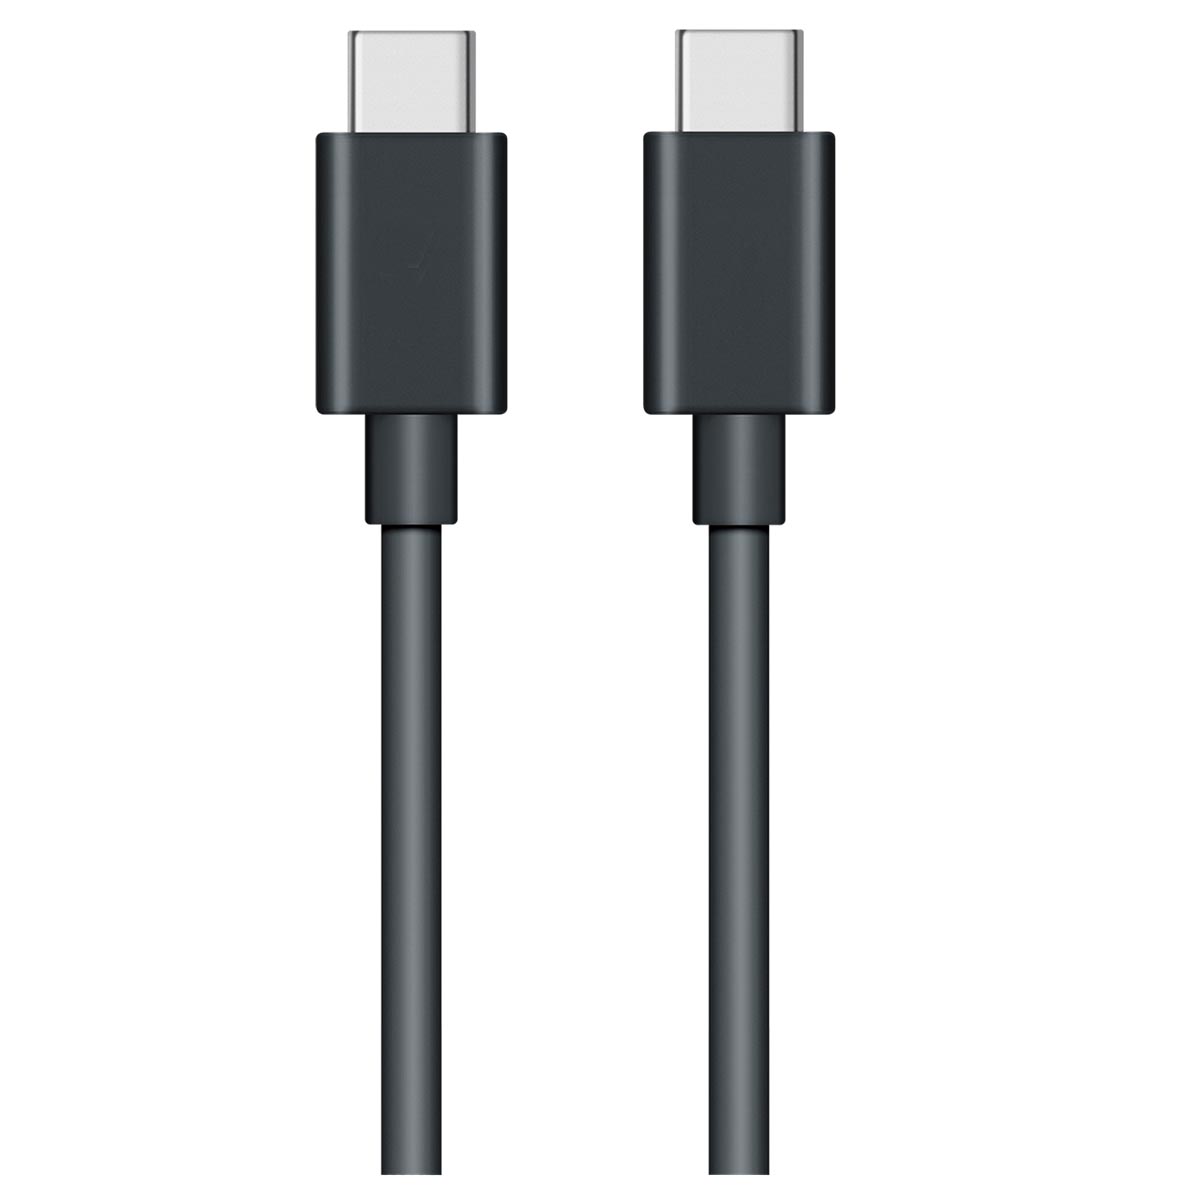 usb charger cables VS data cables